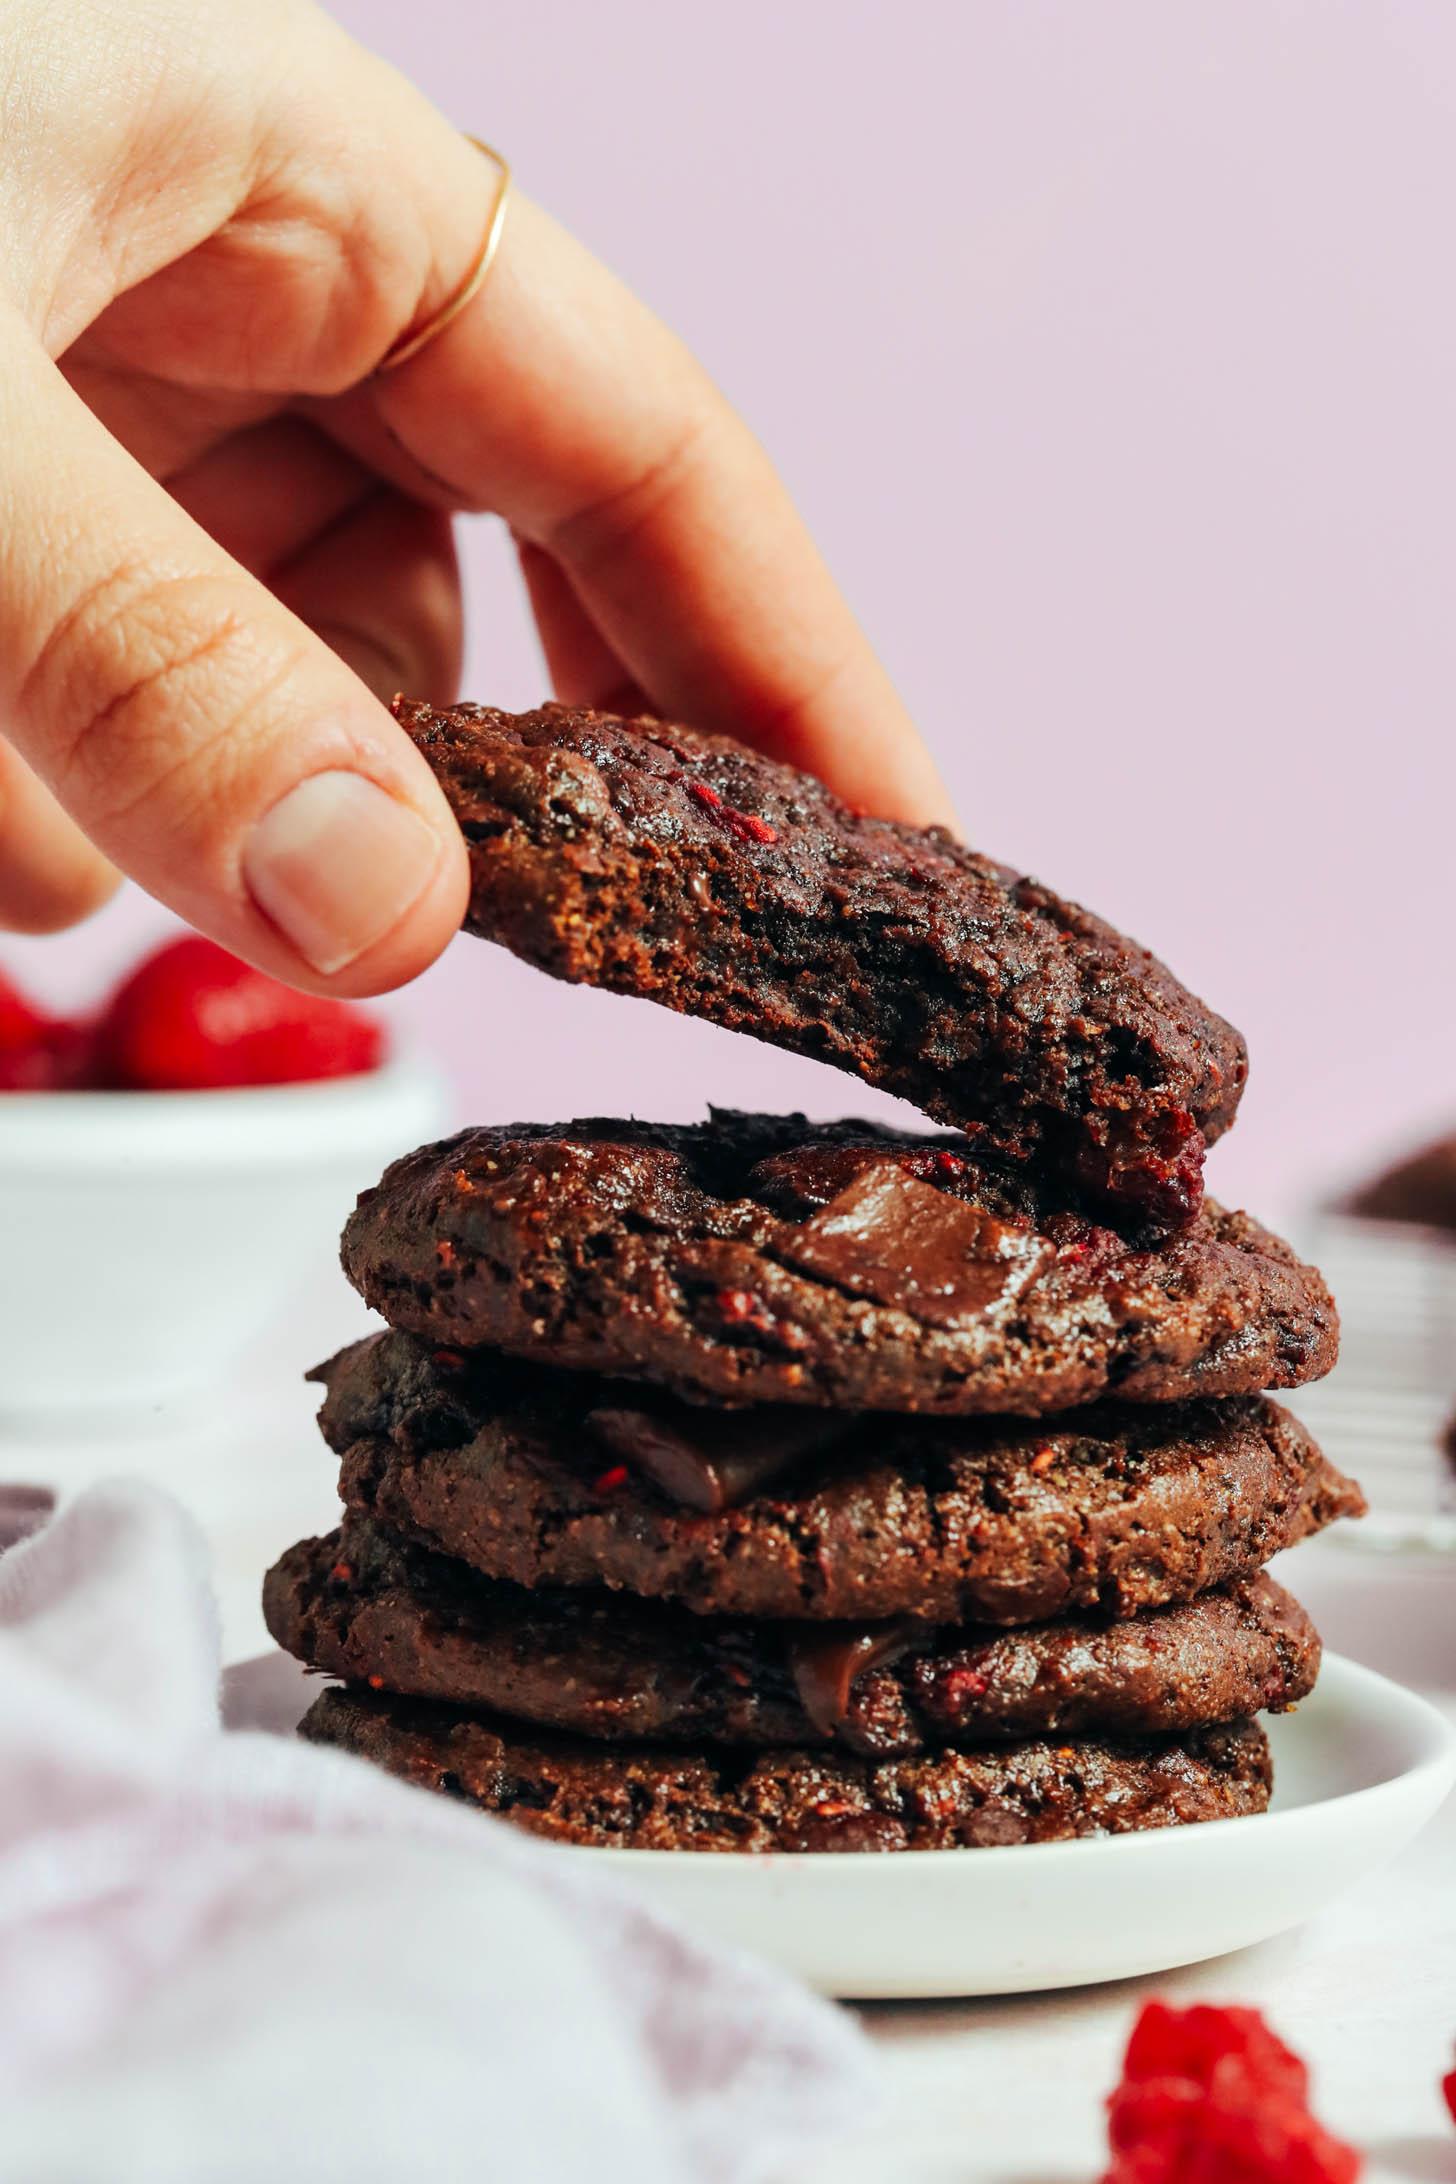 Placing a gluten-free chocolate cake mix cookie onto a stack of more cookies